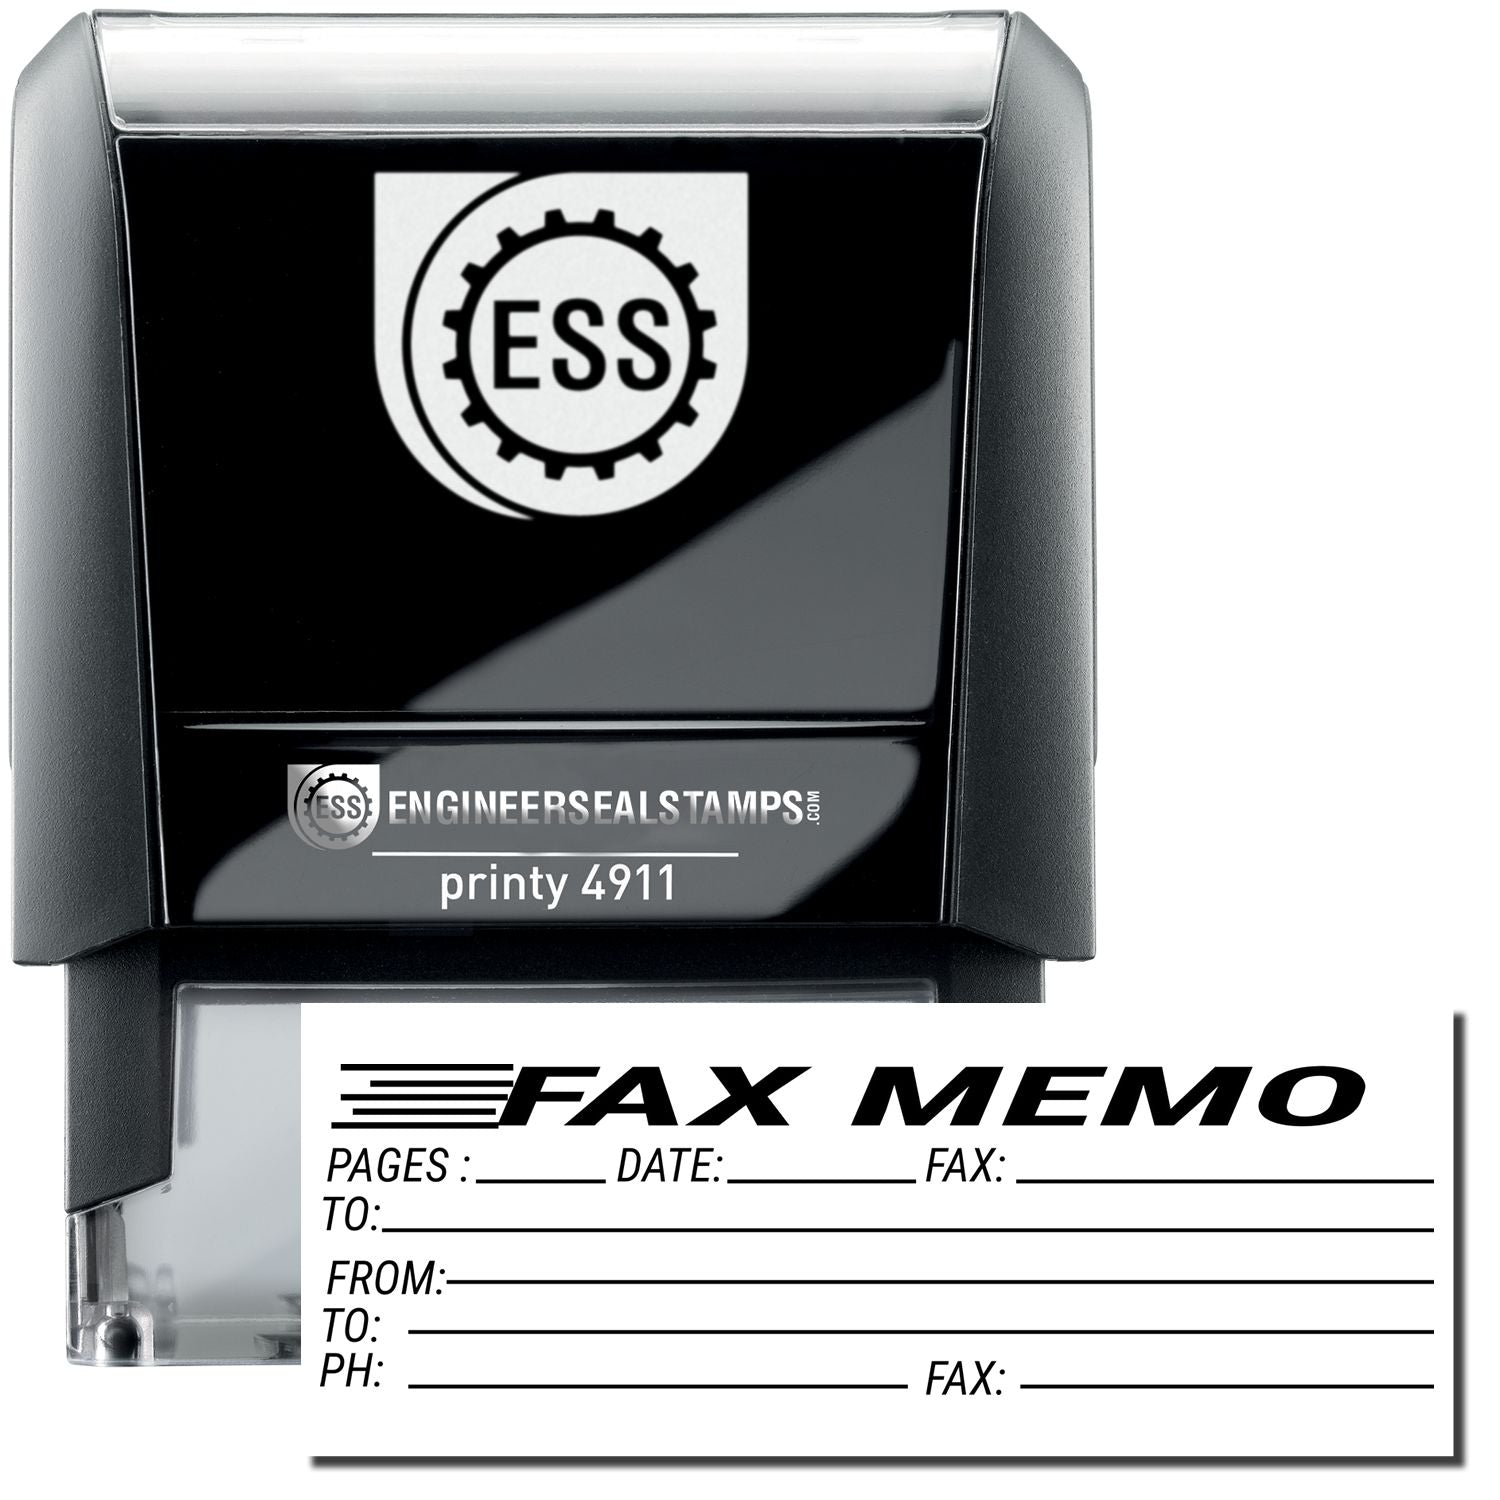 A self-inking stamp with a stamped image showing how the text "FAX MEMO" (with spaces underneath to indicate the number of pages, date, fax information, and who the fax is being sent to) is displayed after stamping.